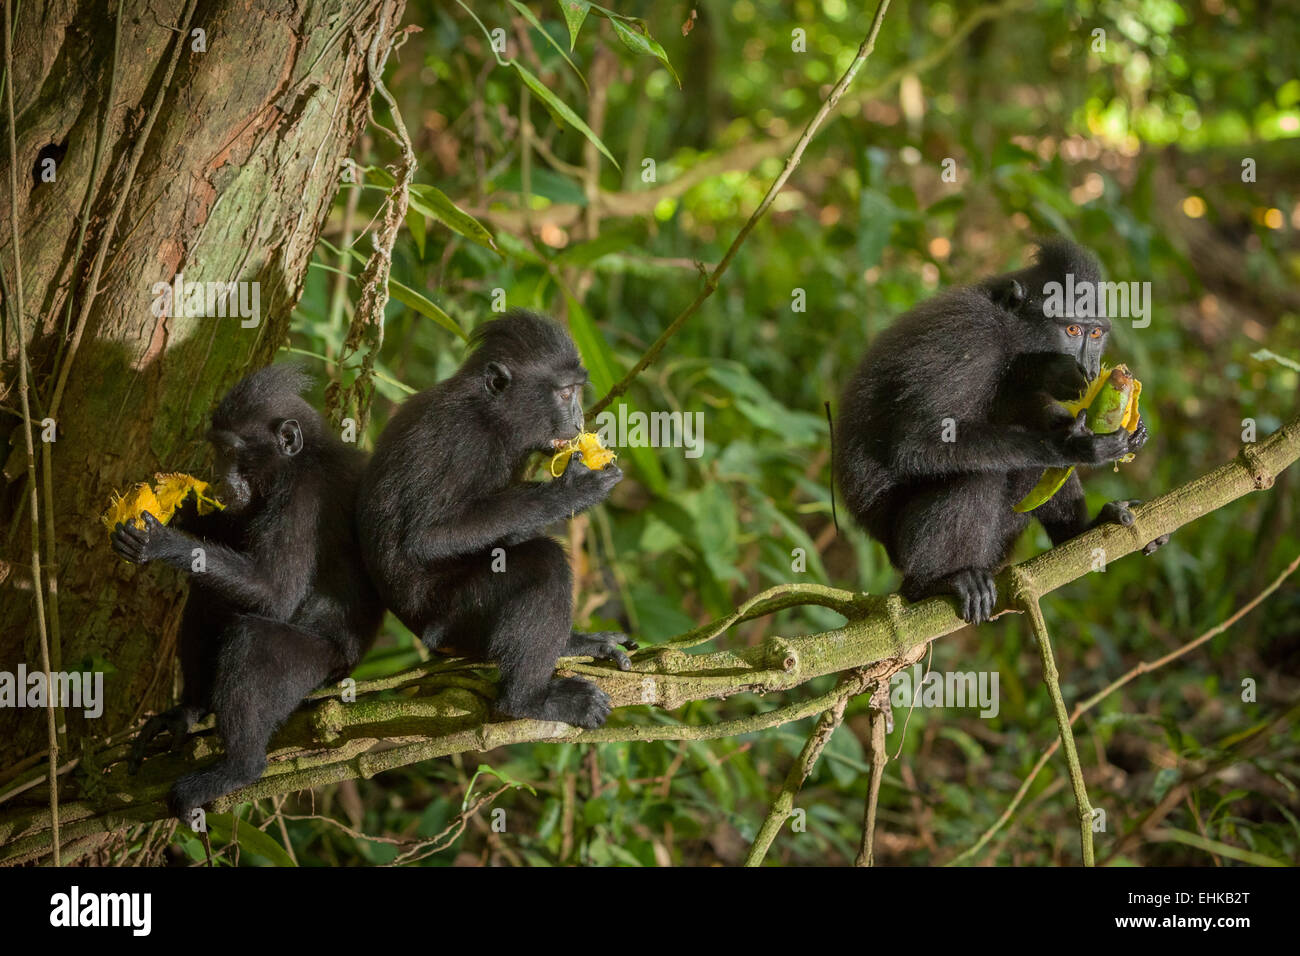 A group of Sulawesi black-crested macaque (Macaca nigra) juveniles eating fruit in Tangkoko forest, North Sulawesi, Indonesia. Stock Photo